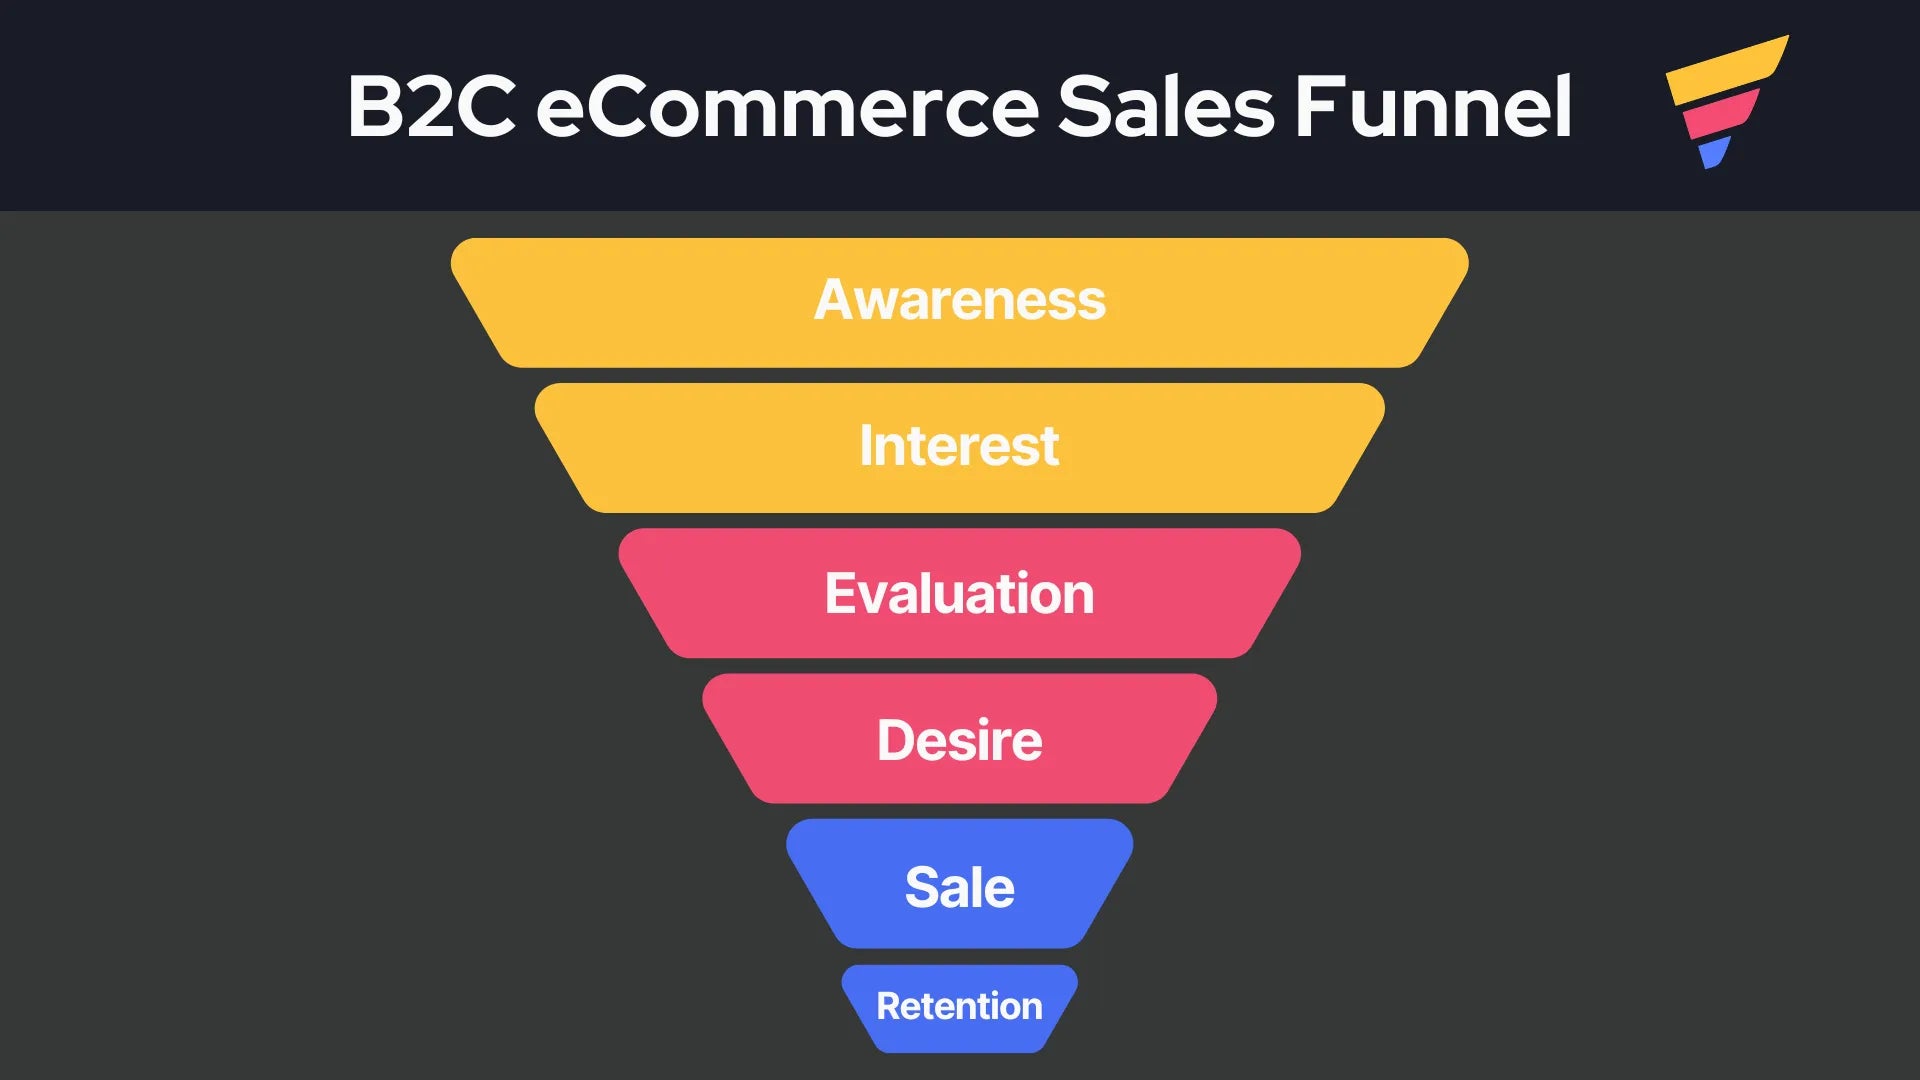 Graphical presentation of B2C eCommerce Sales Funnel